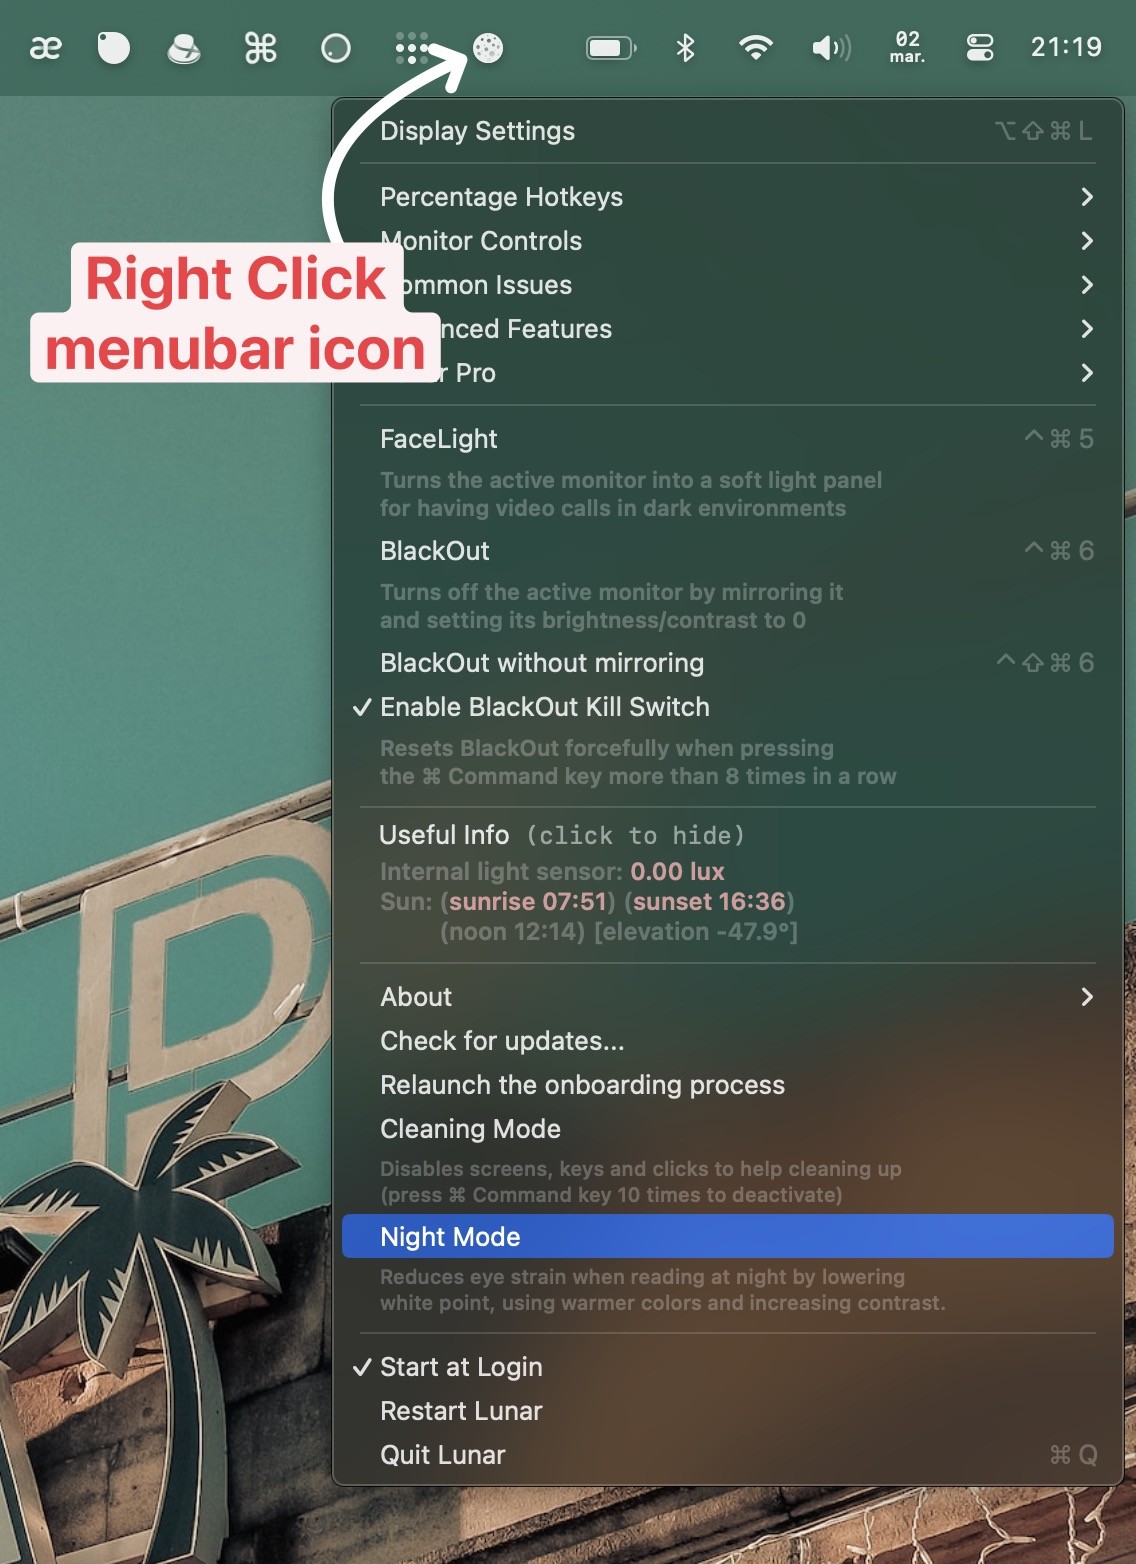 activating night mode from the menubar